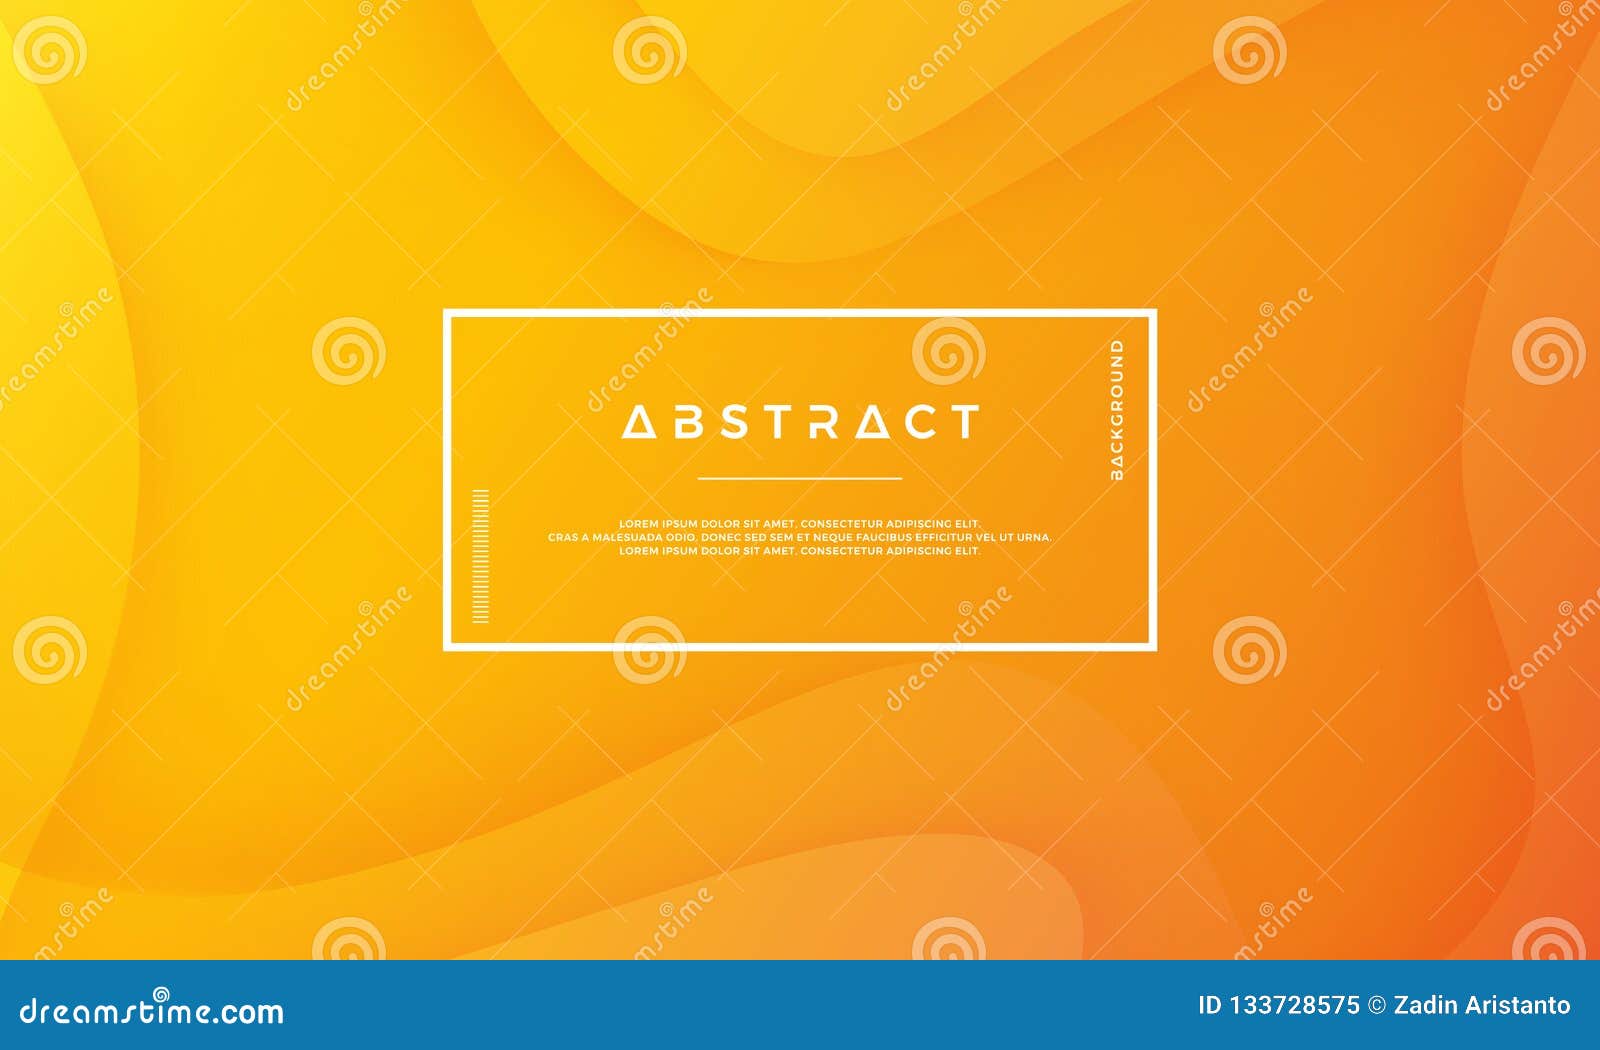 orange abstract background is suitable for web, header, cover, brochure, web banner and others